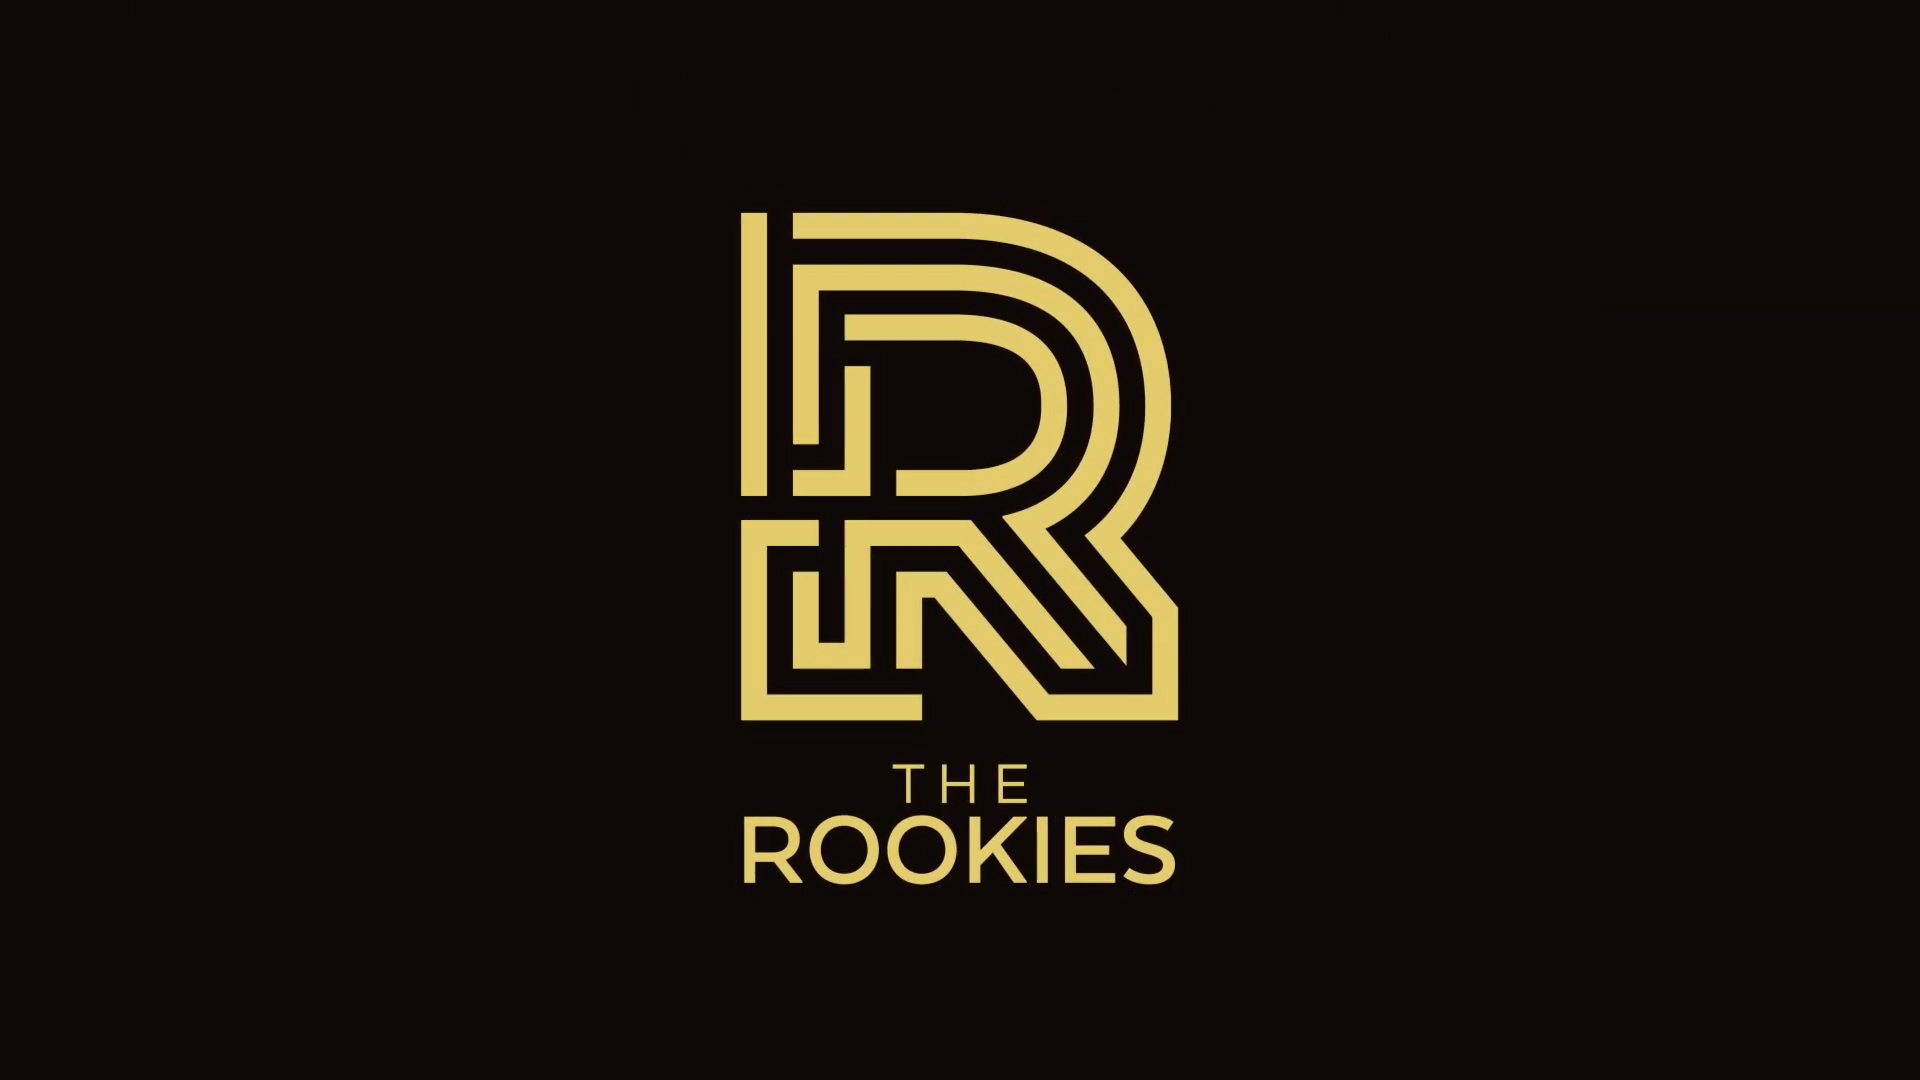 The Rookie Awards